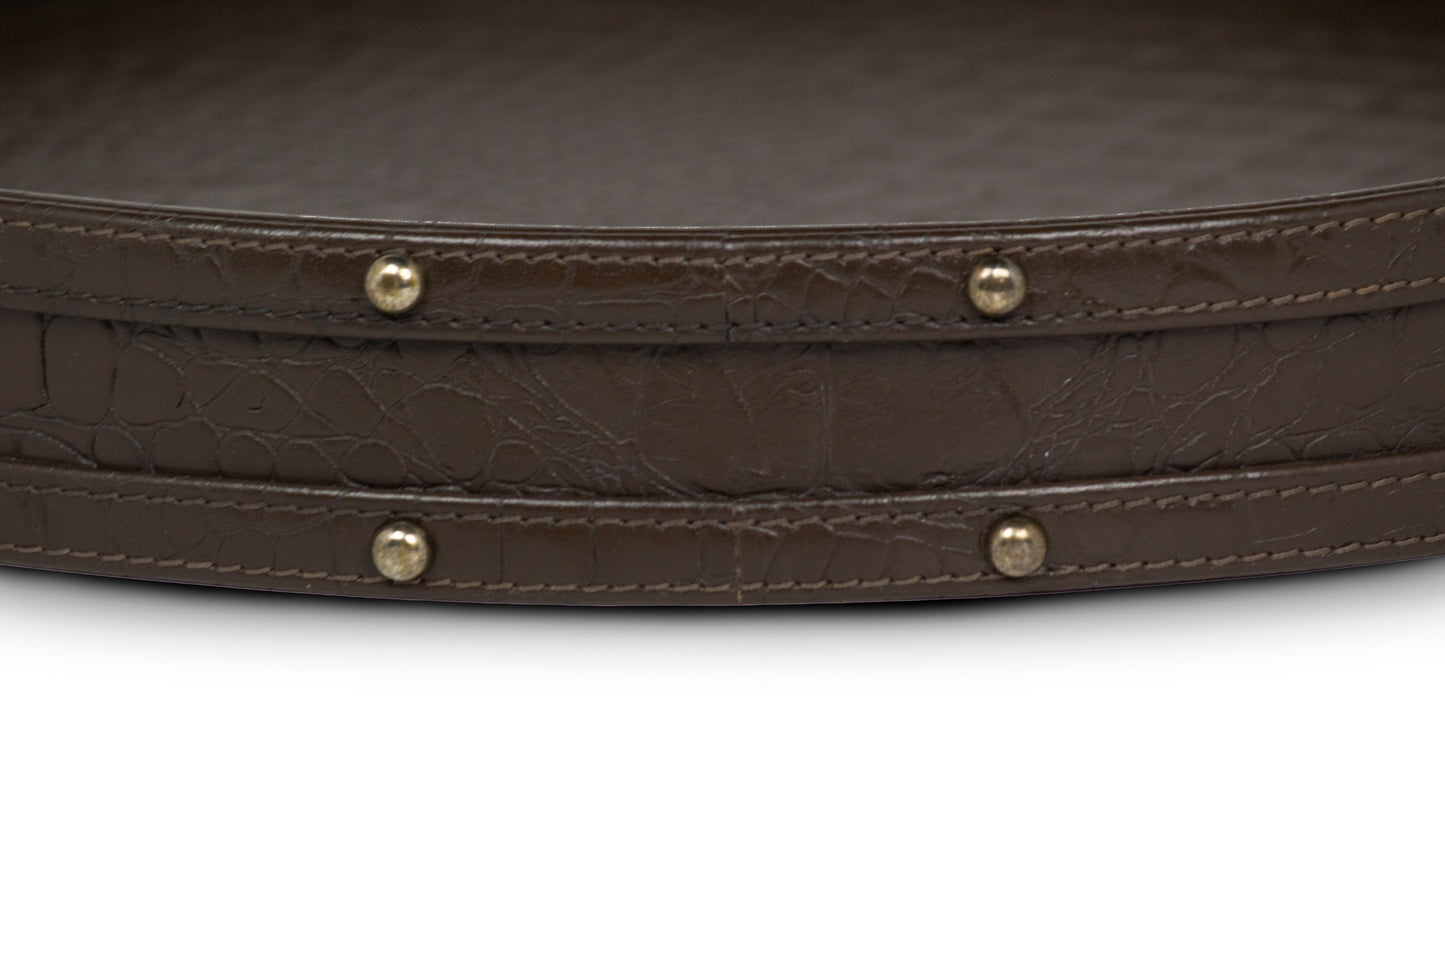 Round Tray In Genuine Croco Leather Brown